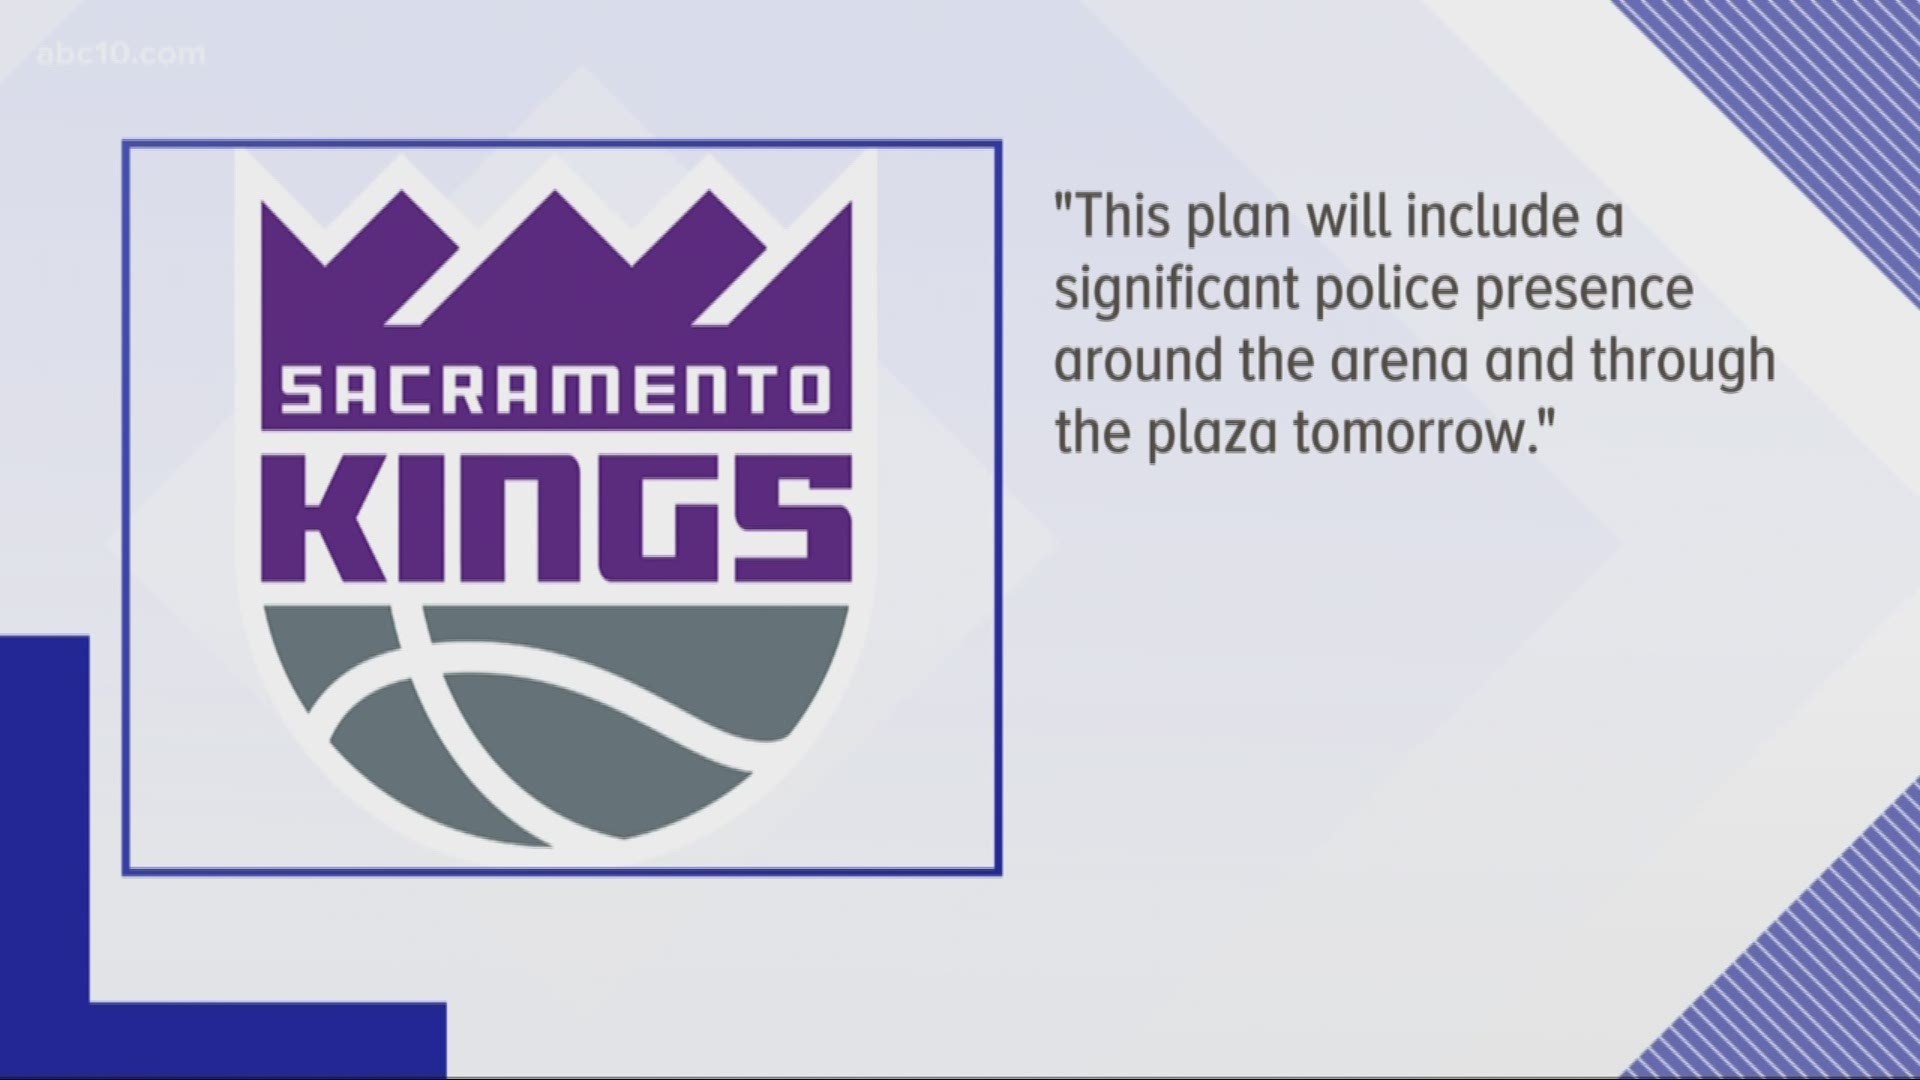 On Thursday, the Sacramento Kings will play host to the visiting Indiana Pacers at the Golden 1 Center at 7 p.m. (Mar. 28, 2018)